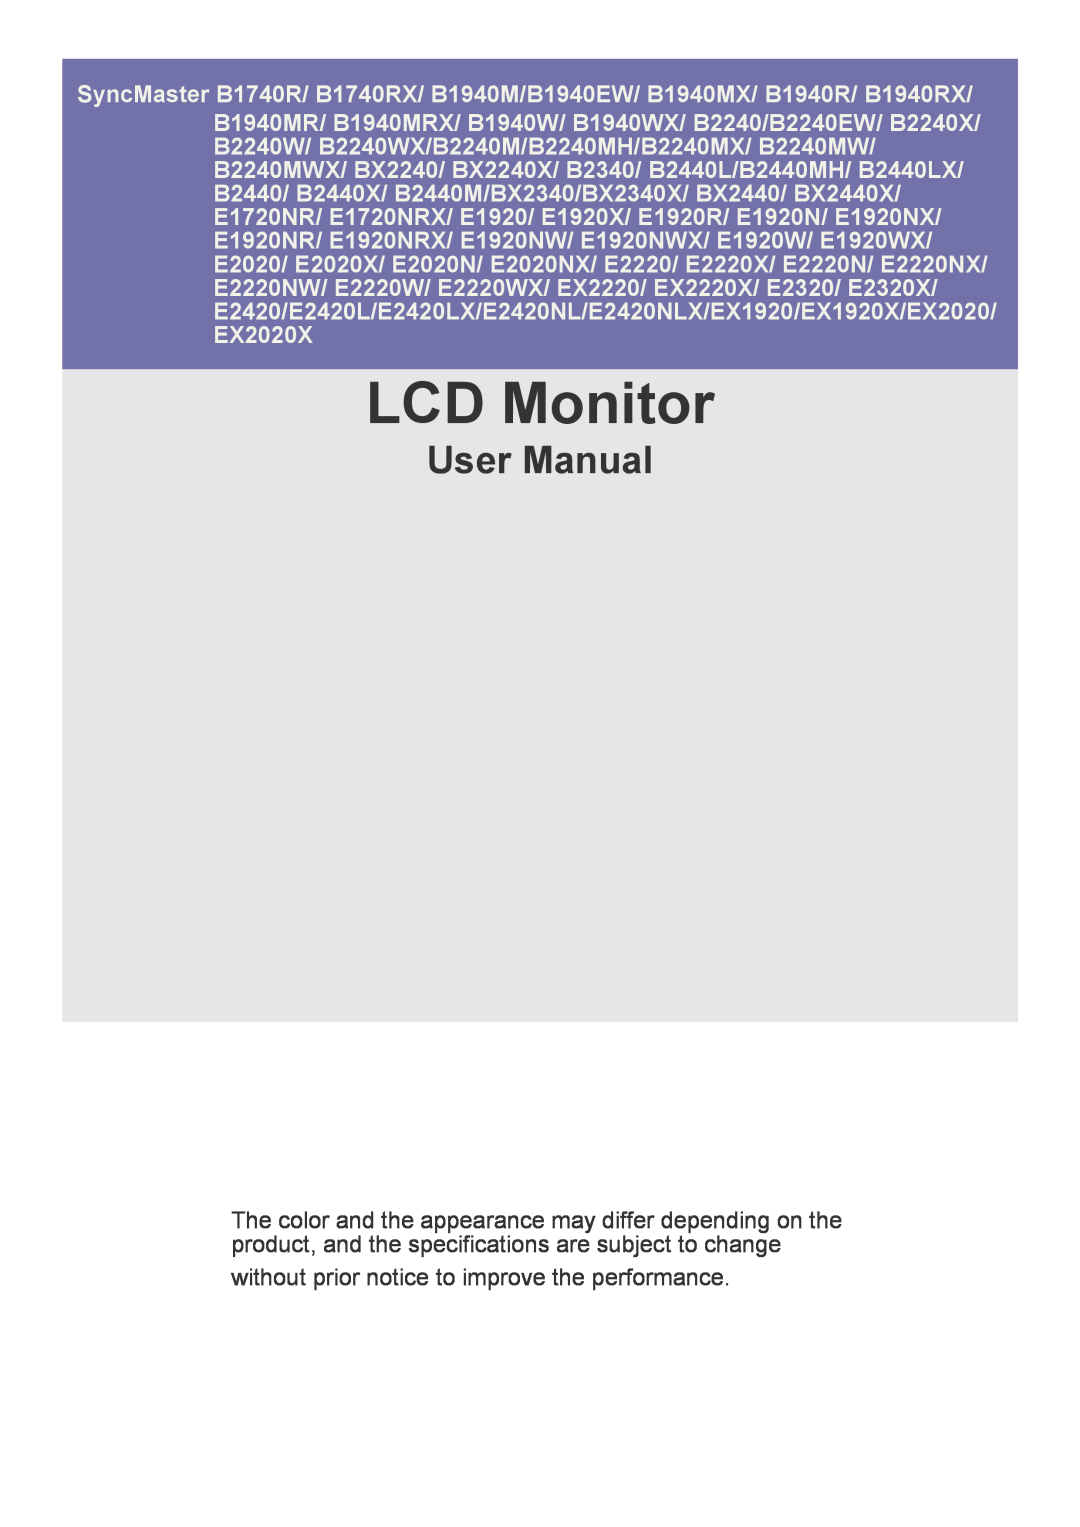 Samsung B2240MWX user manual LCD Monitor, User Manual, without prior notice to improve the performance 